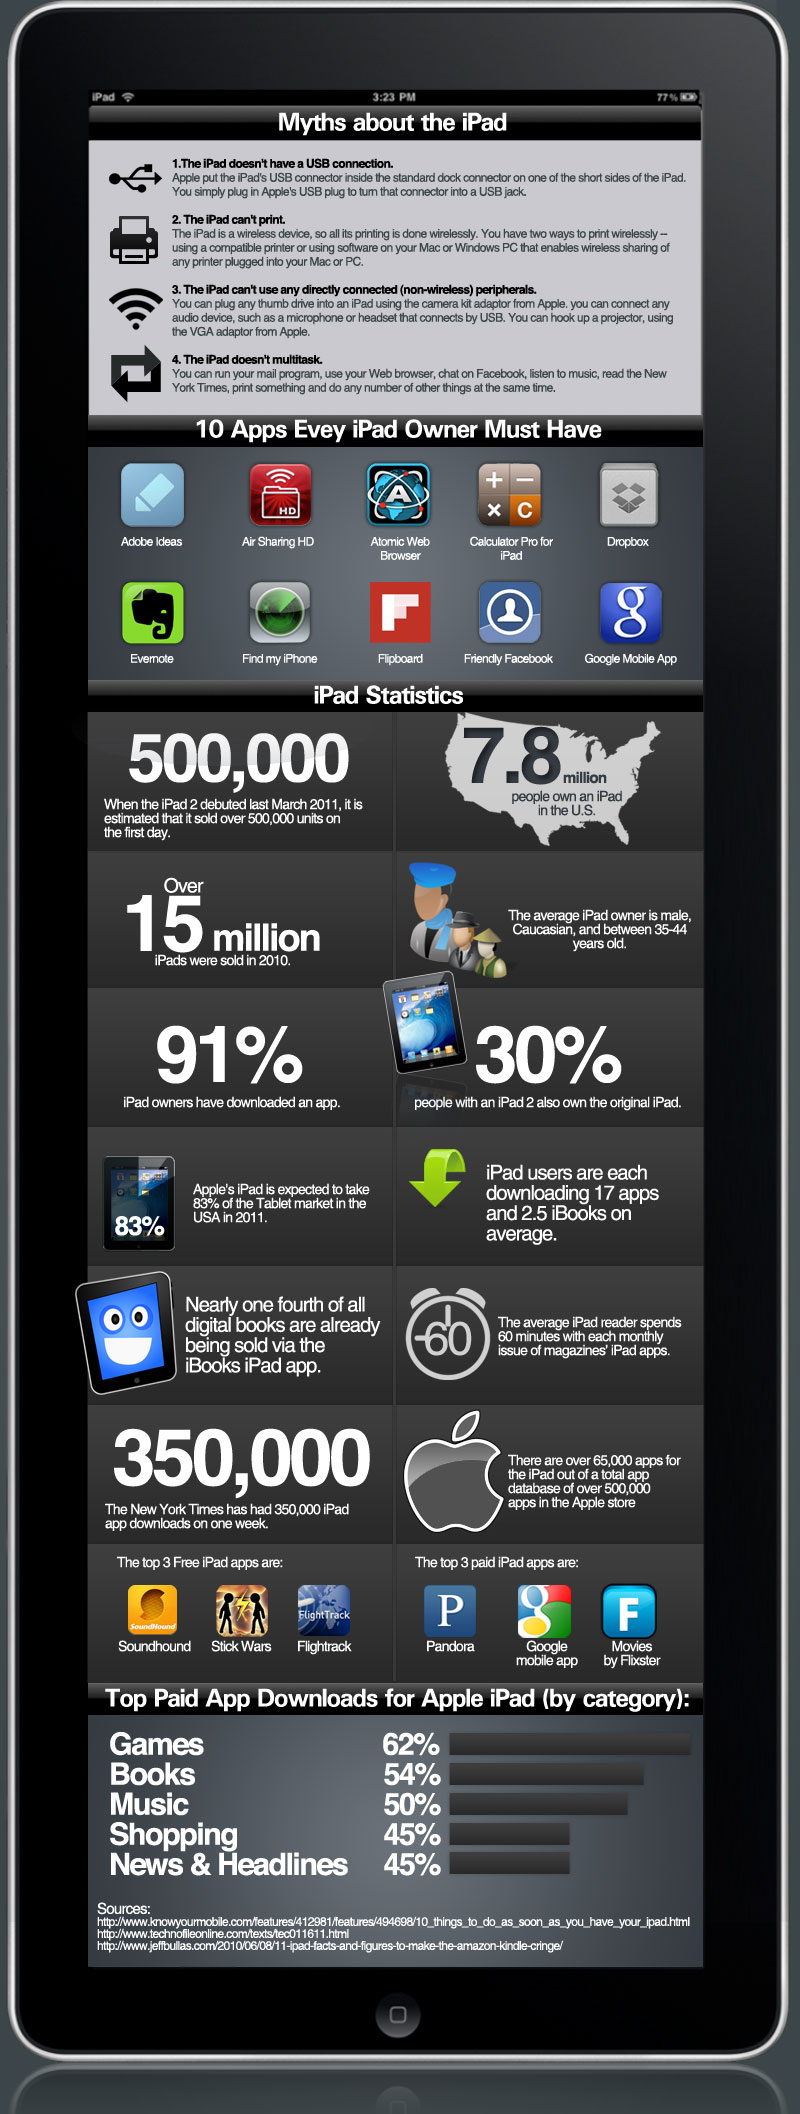 Things You Didn’t Know About Your iPad [Infographic]